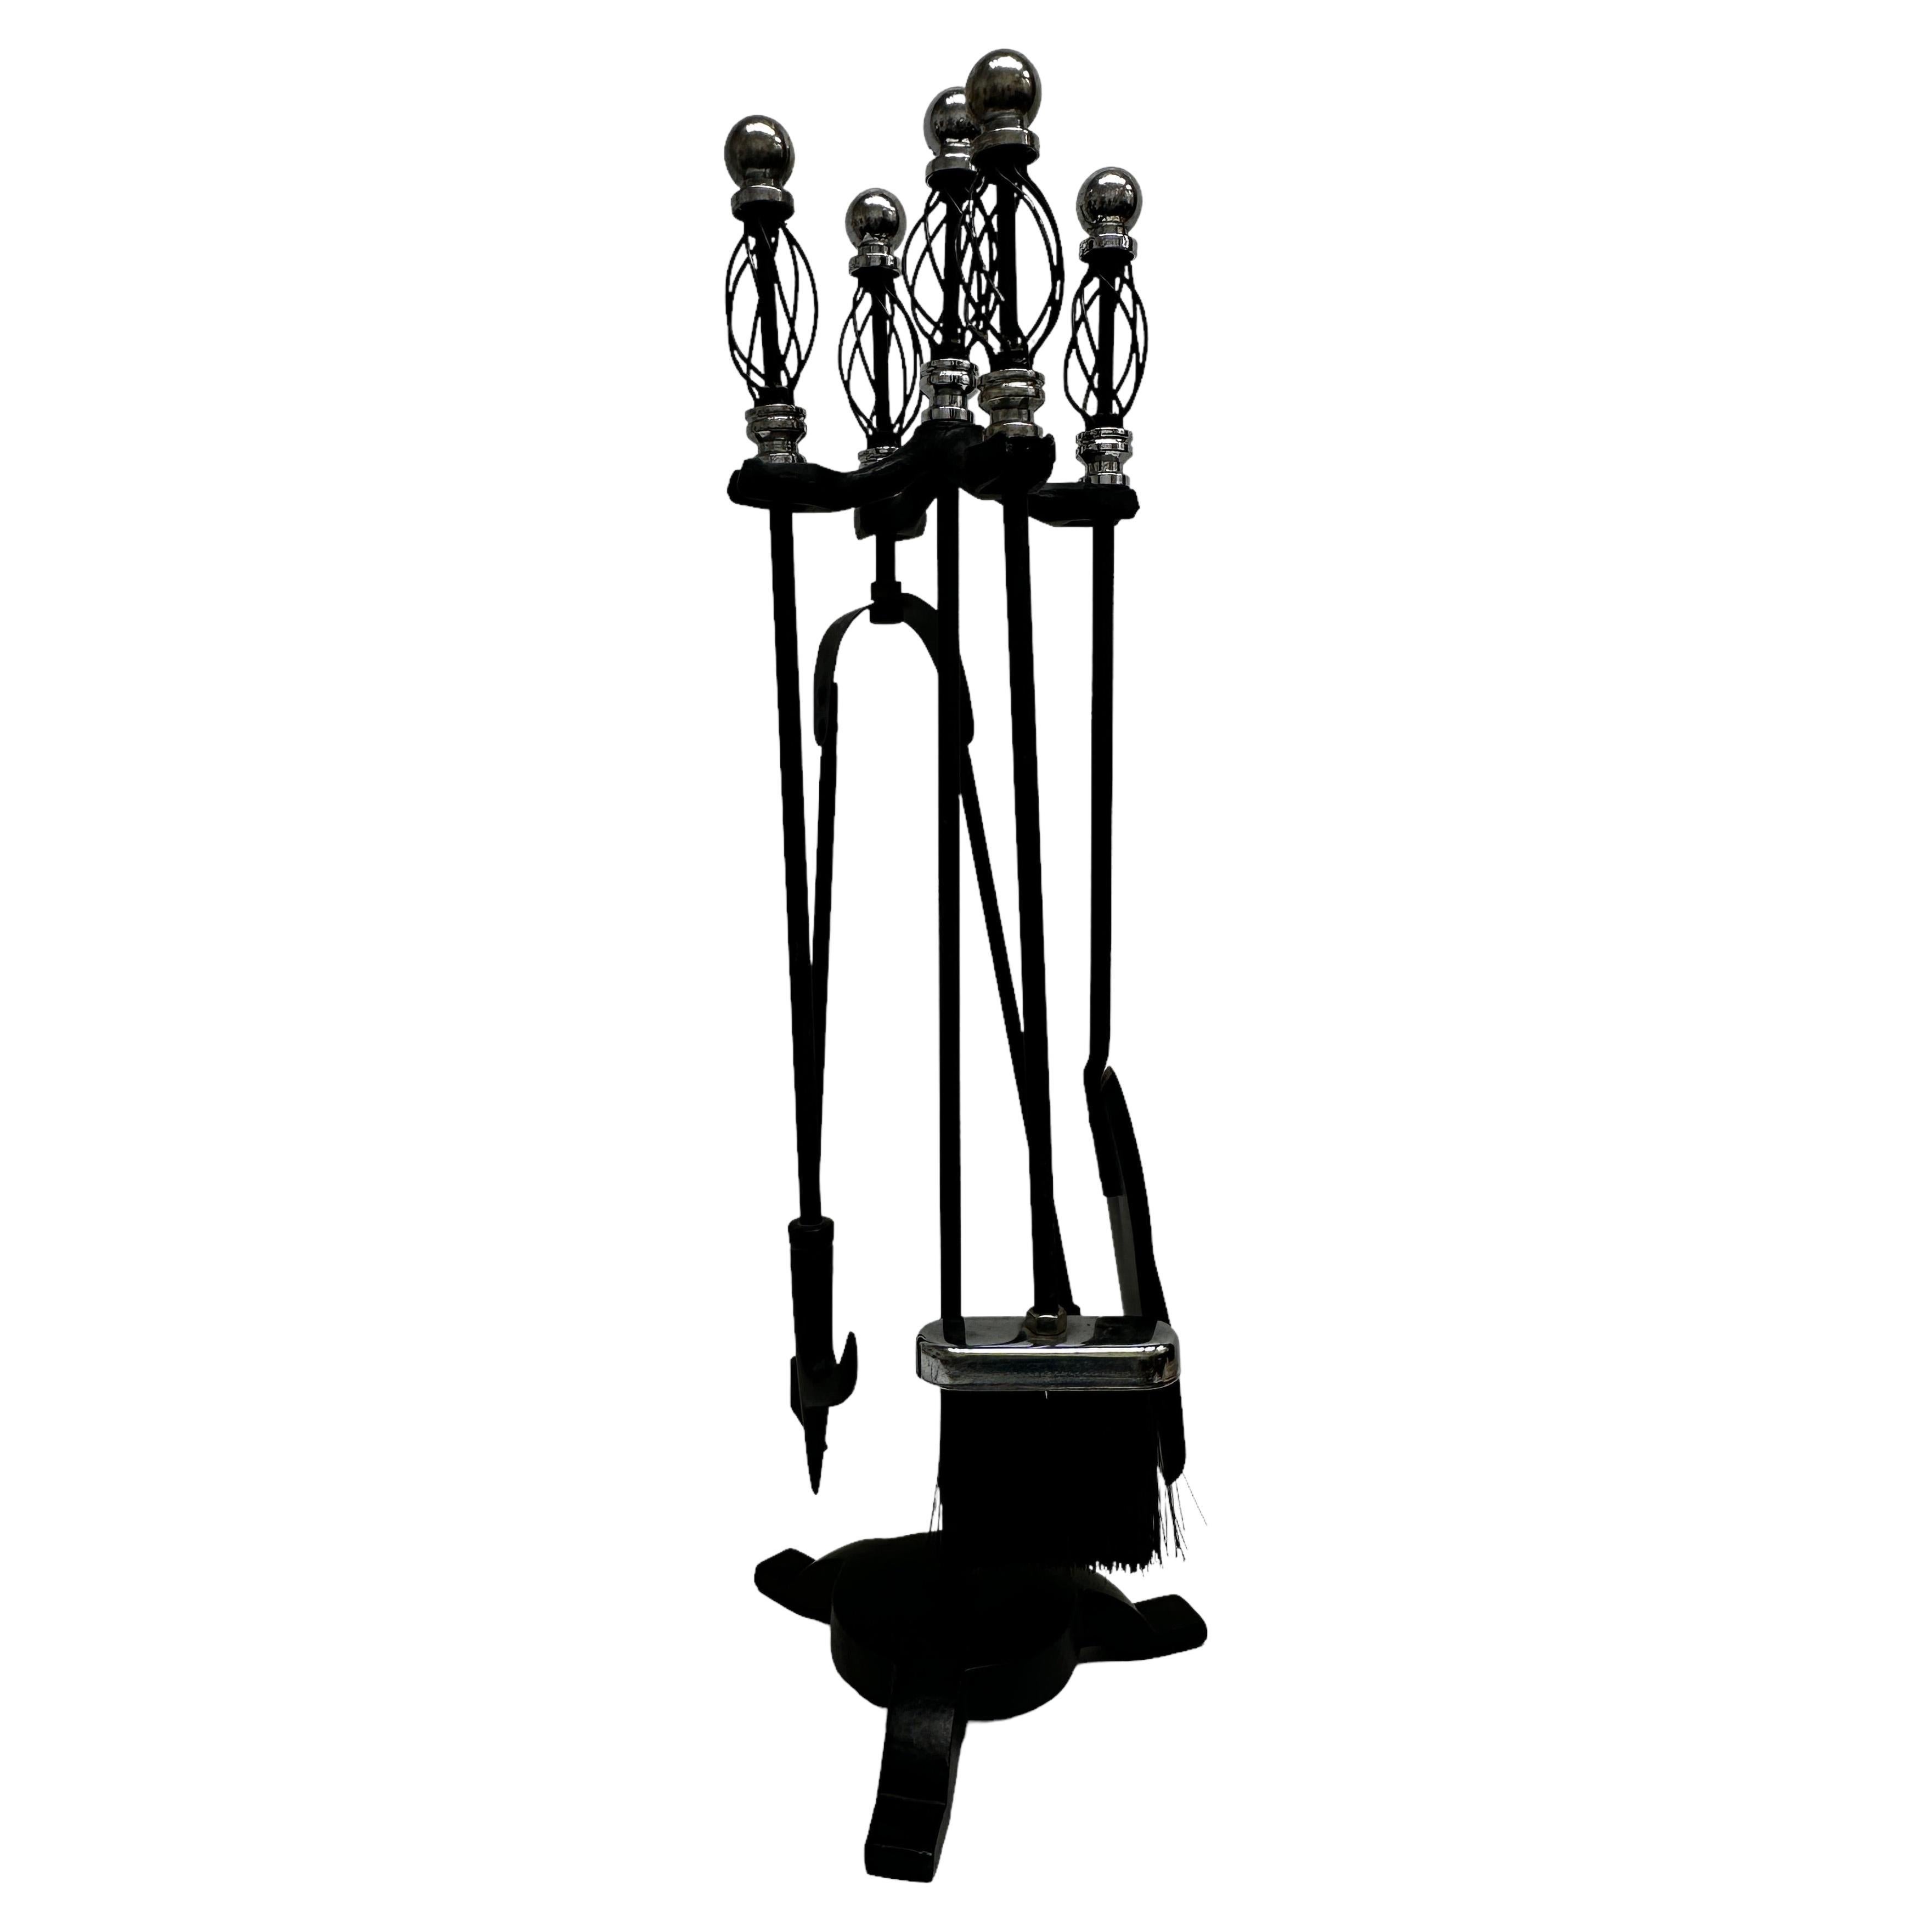 A fireplace tool set, fire irons made of black colored metal and chrome or nickel plate handles. Original as found condition (see all the detailed pictures). Some patina to the metal, but this is old-age. Set of 4 tools and the stand. A dent at the